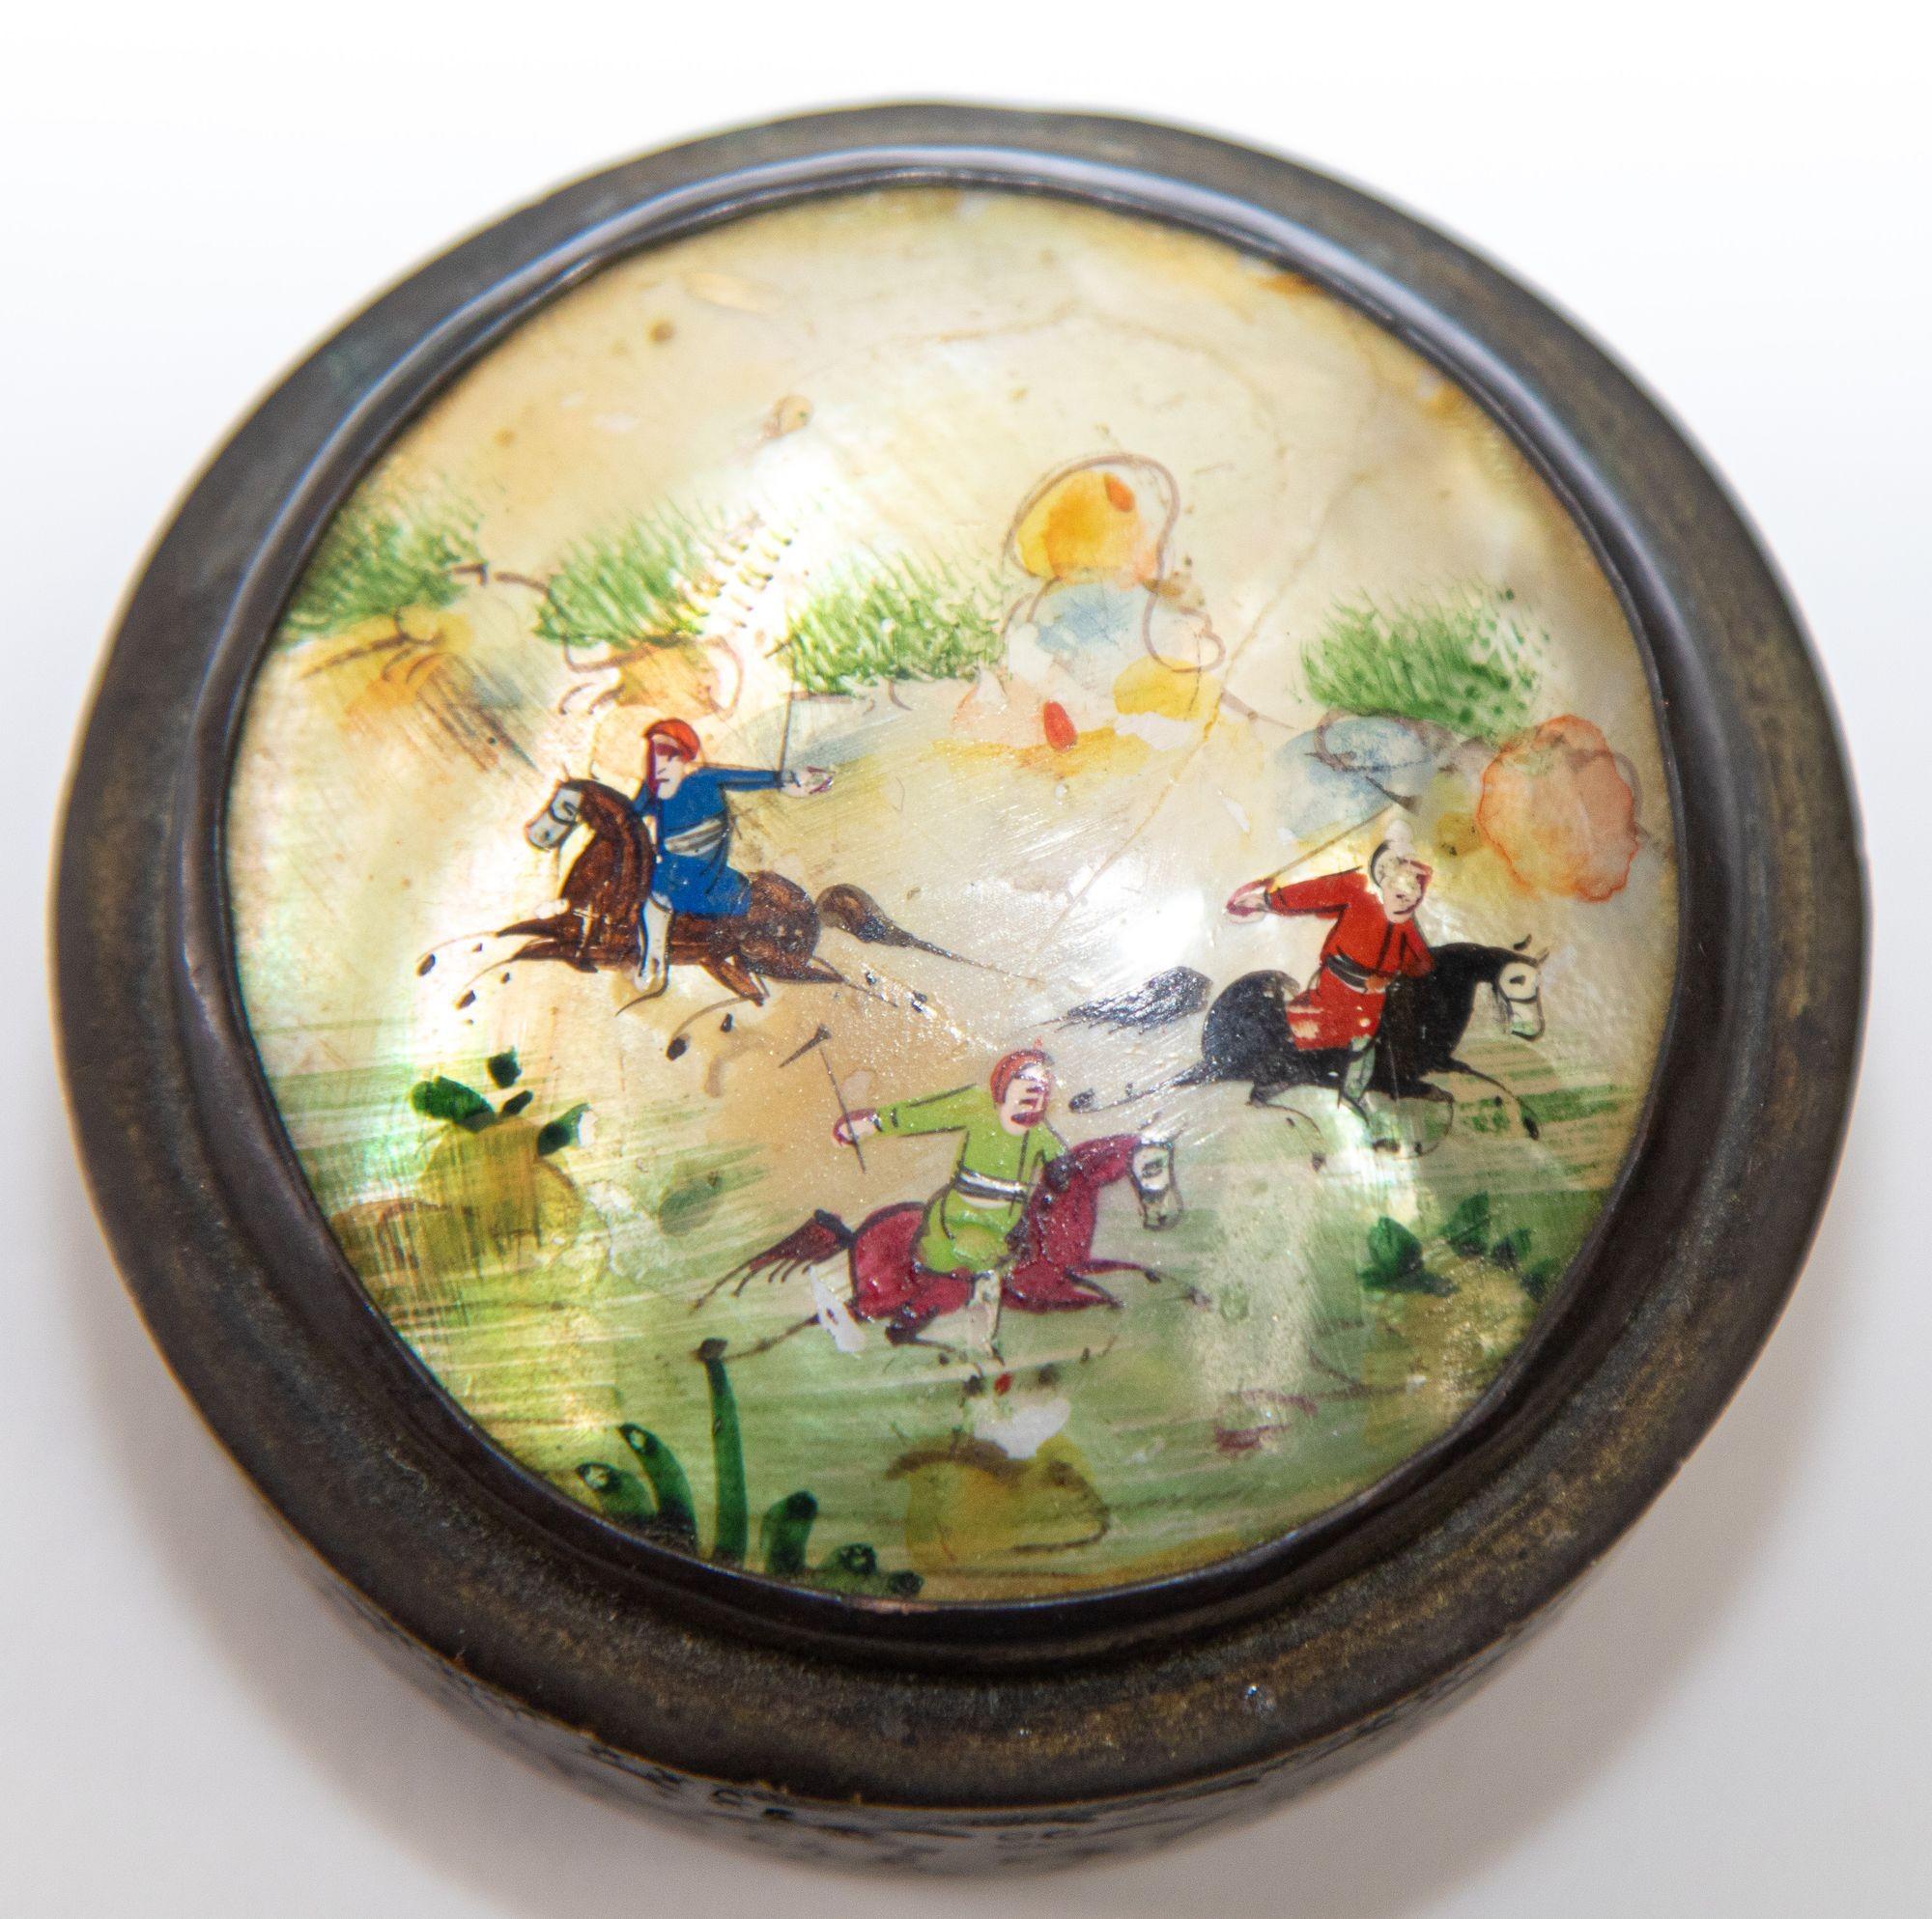 Vintage round brass pill box with lid shell inlaid and miniature hand-painted with Persian polo sport scene.
Beautiful and unusual round metal pill box or snuff box with a pearlescent inset and hand-painted motif of Persian riders playing polo.
The